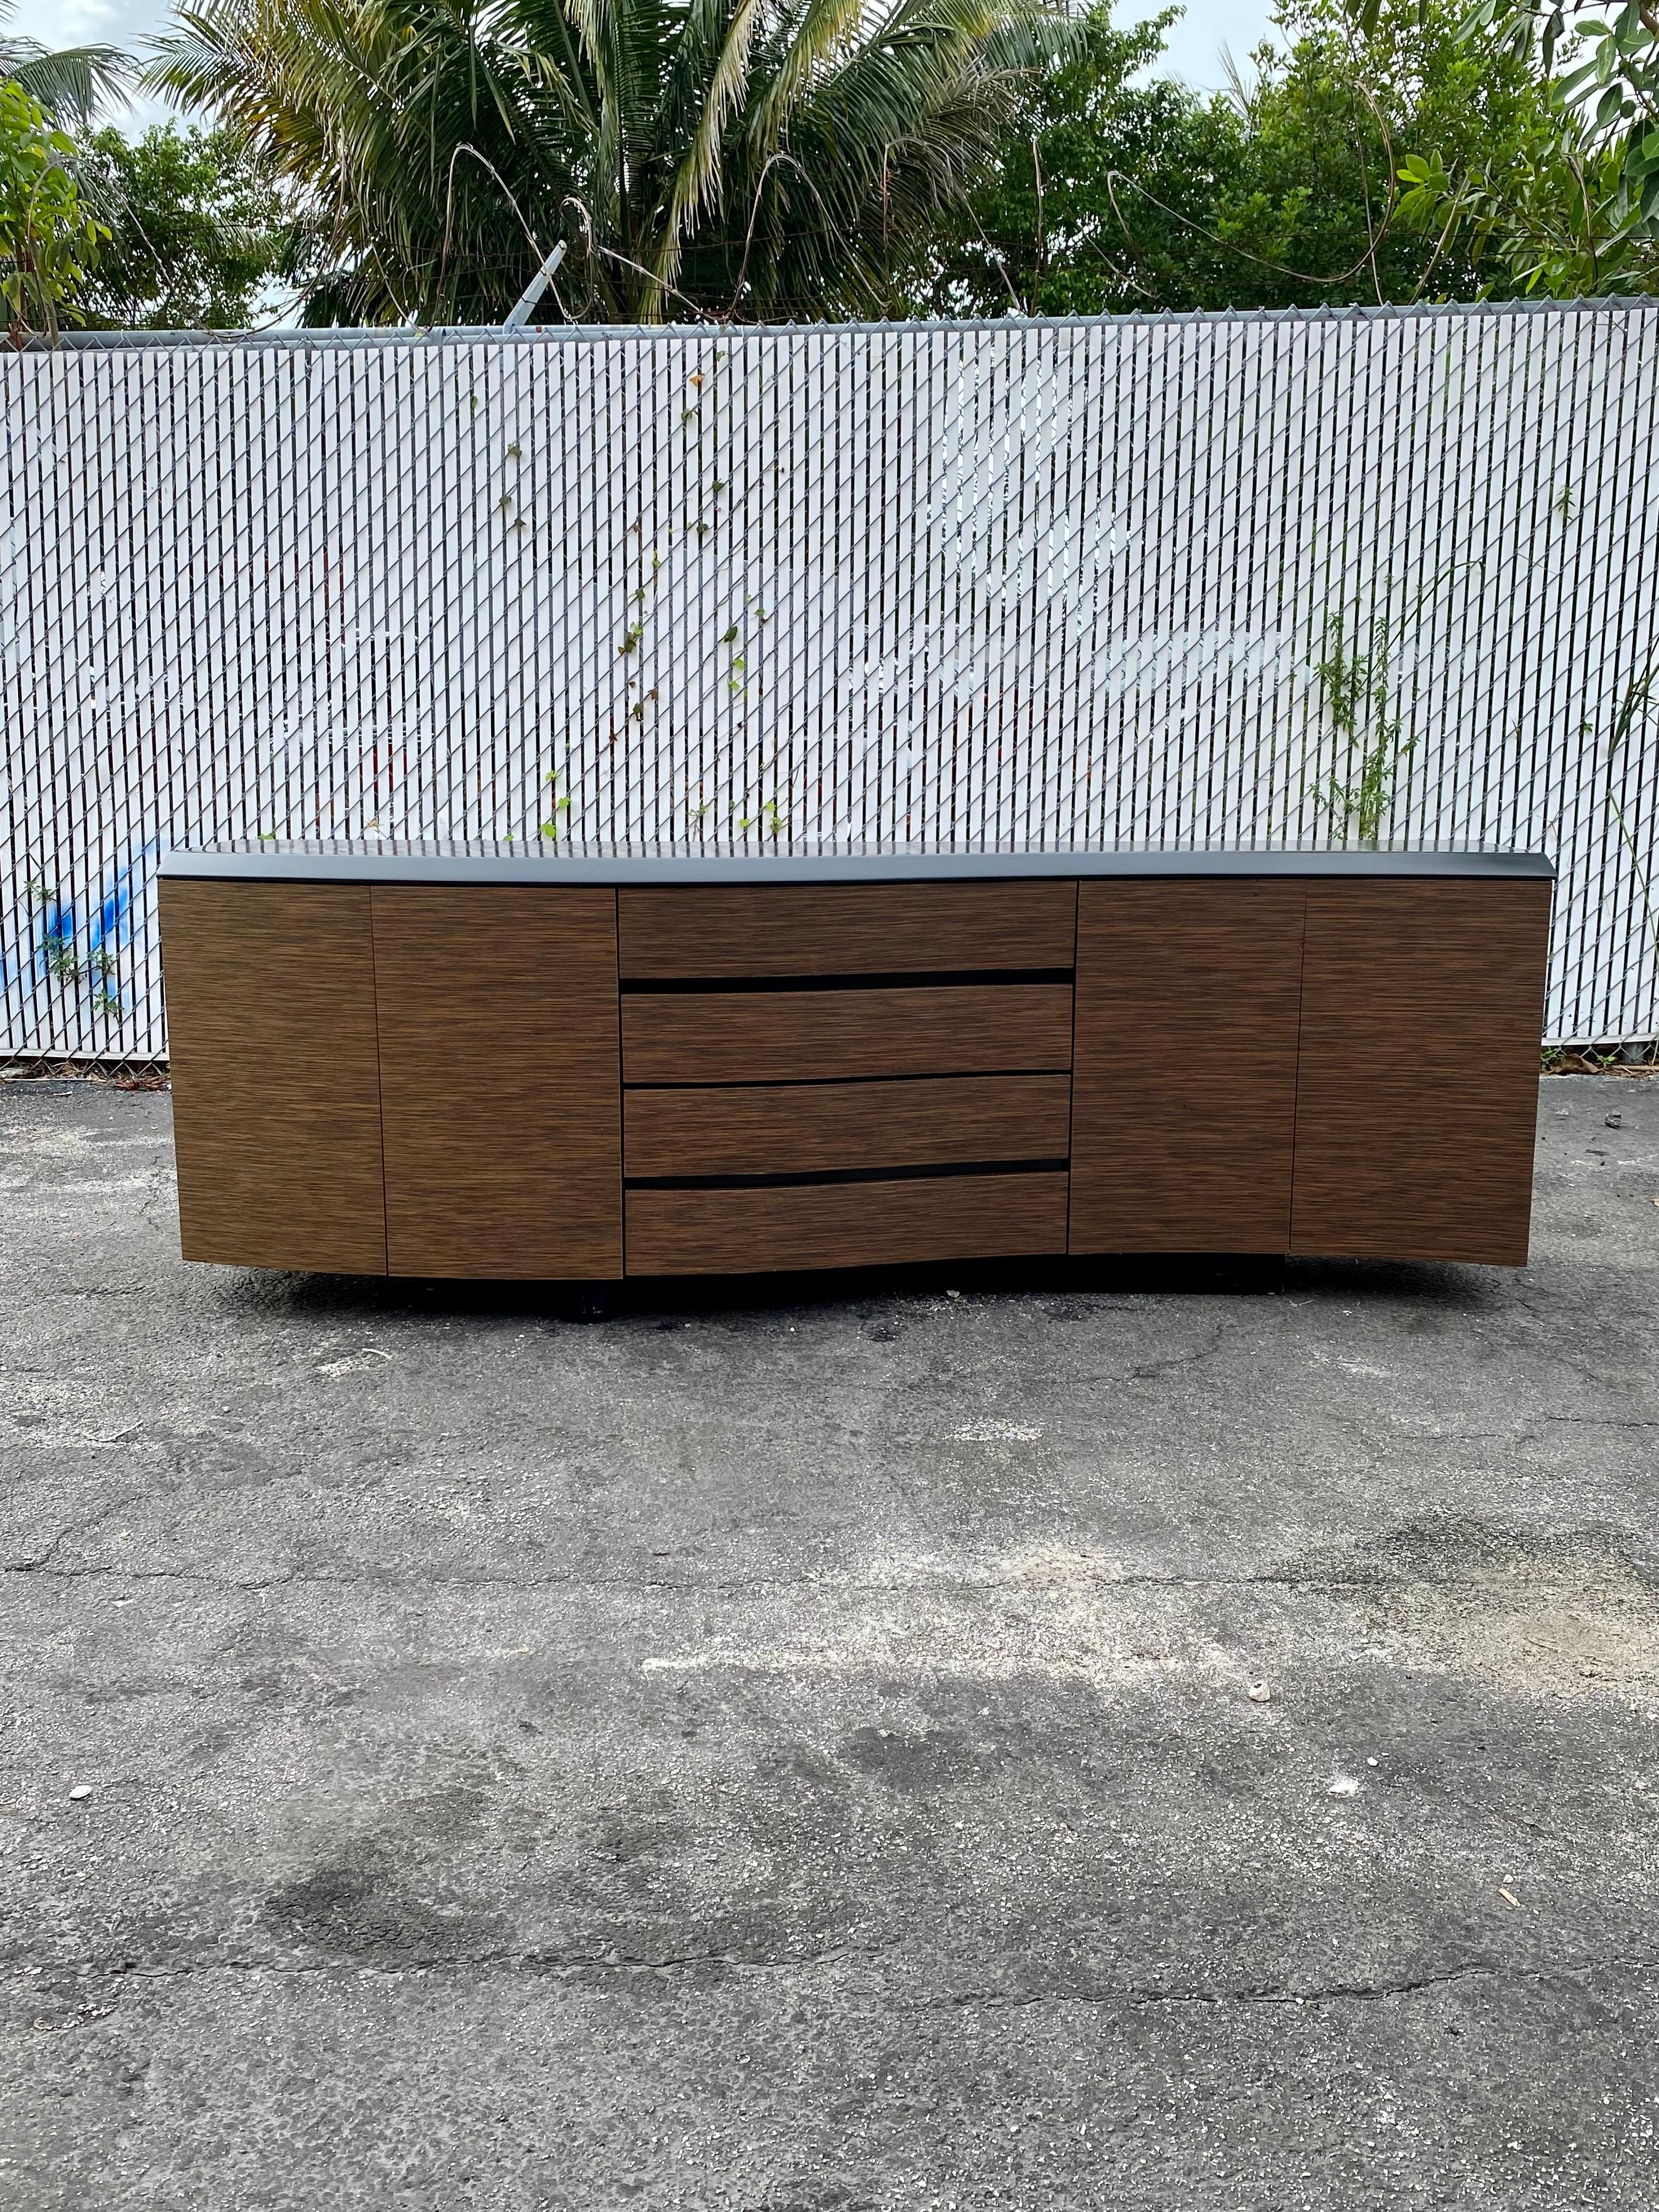 On offer on this occasion is one of the most stunning, table you could hope to find. This is an ultra-rare opportunity to acquire what is, unequivocally, the best of the best, it being a most spectacular and beautifully-presented sideboard or